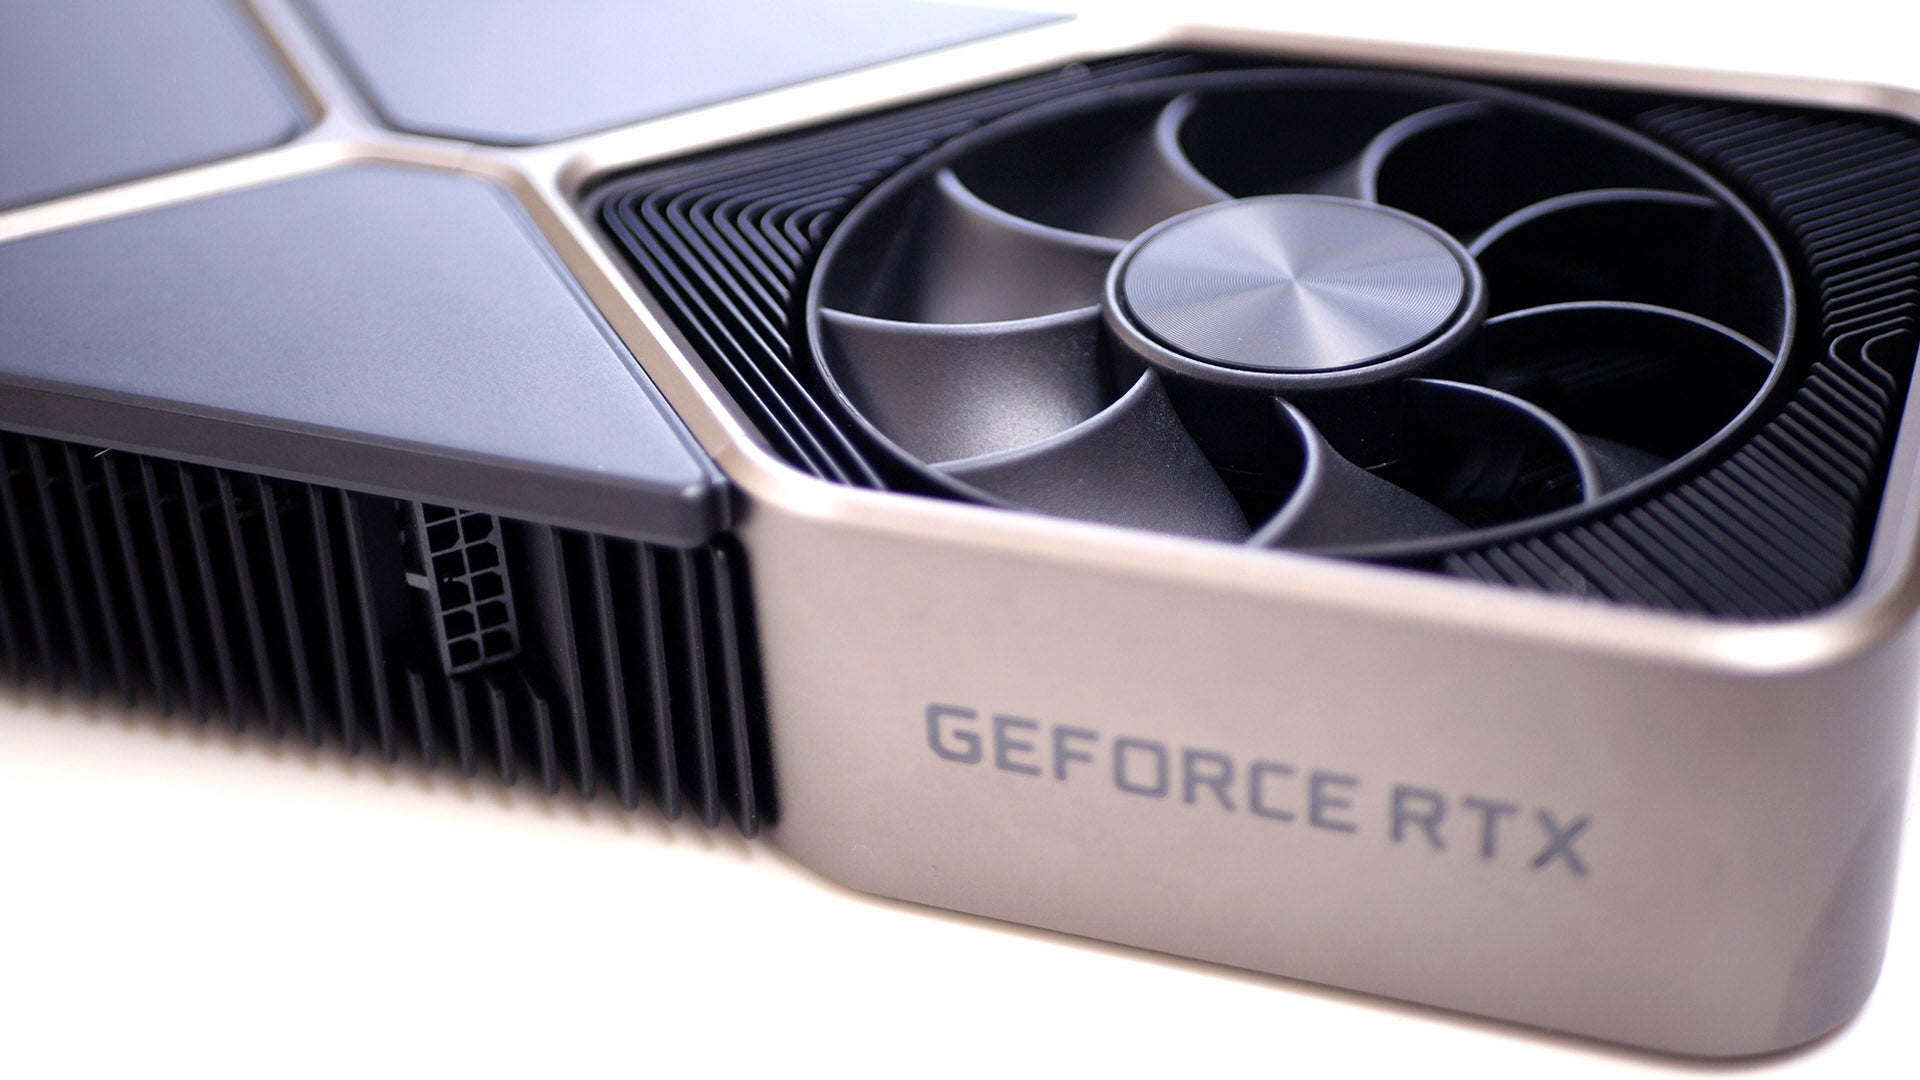 Image for Nvidia GeForce RTX 3080 Ti Review: Big Performance, Extreme Price Tag